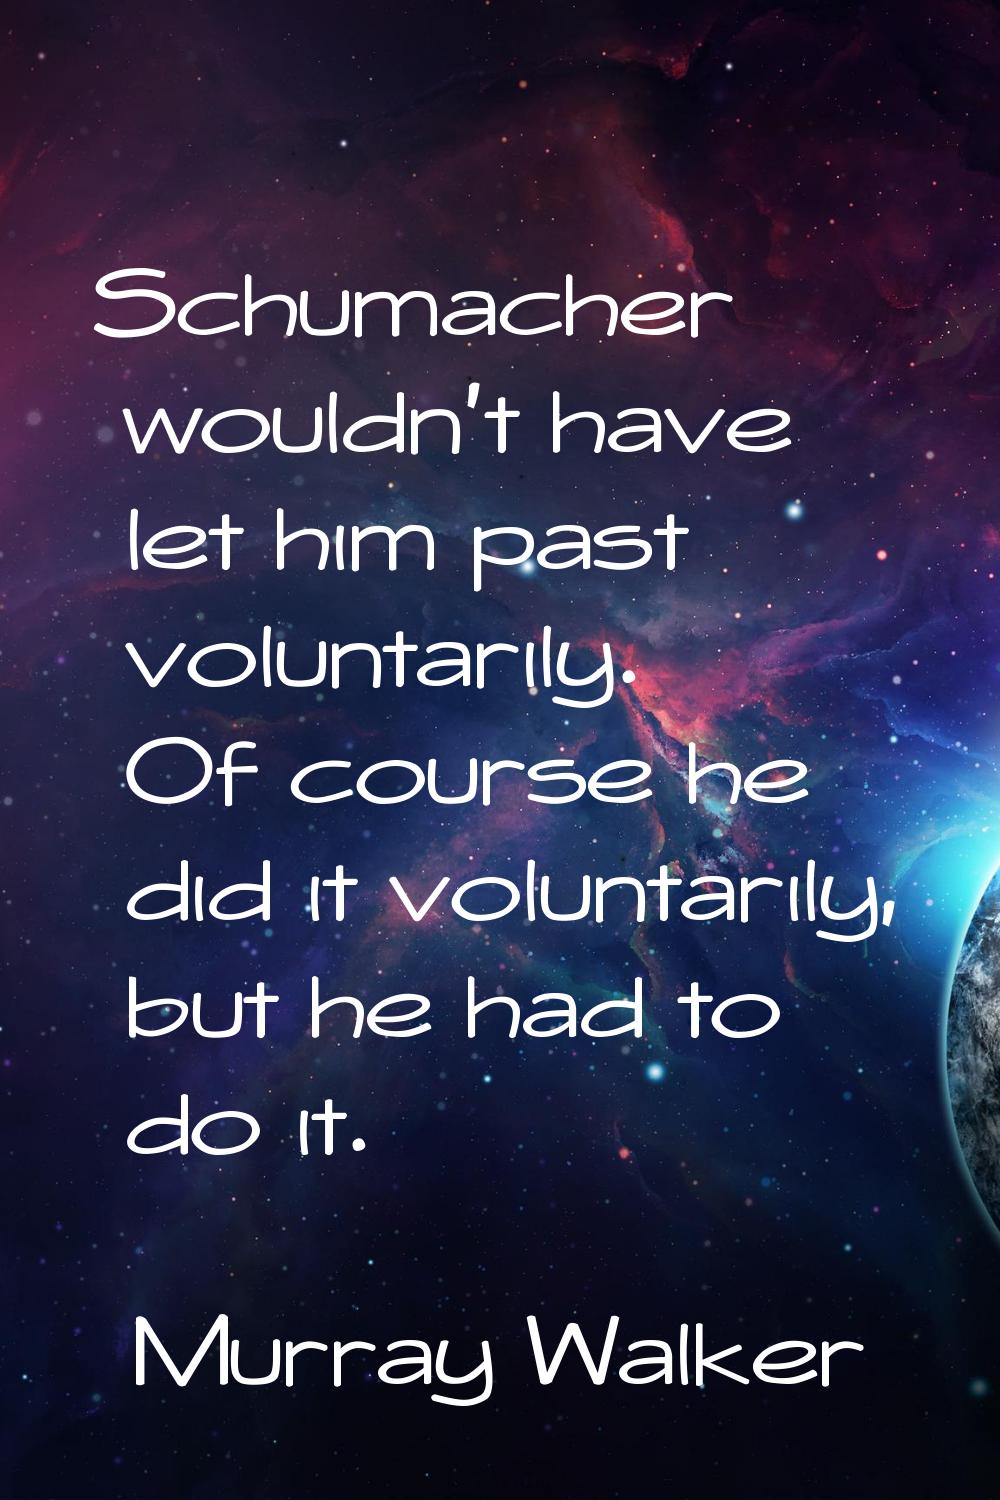 Schumacher wouldn't have let him past voluntarily. Of course he did it voluntarily, but he had to d